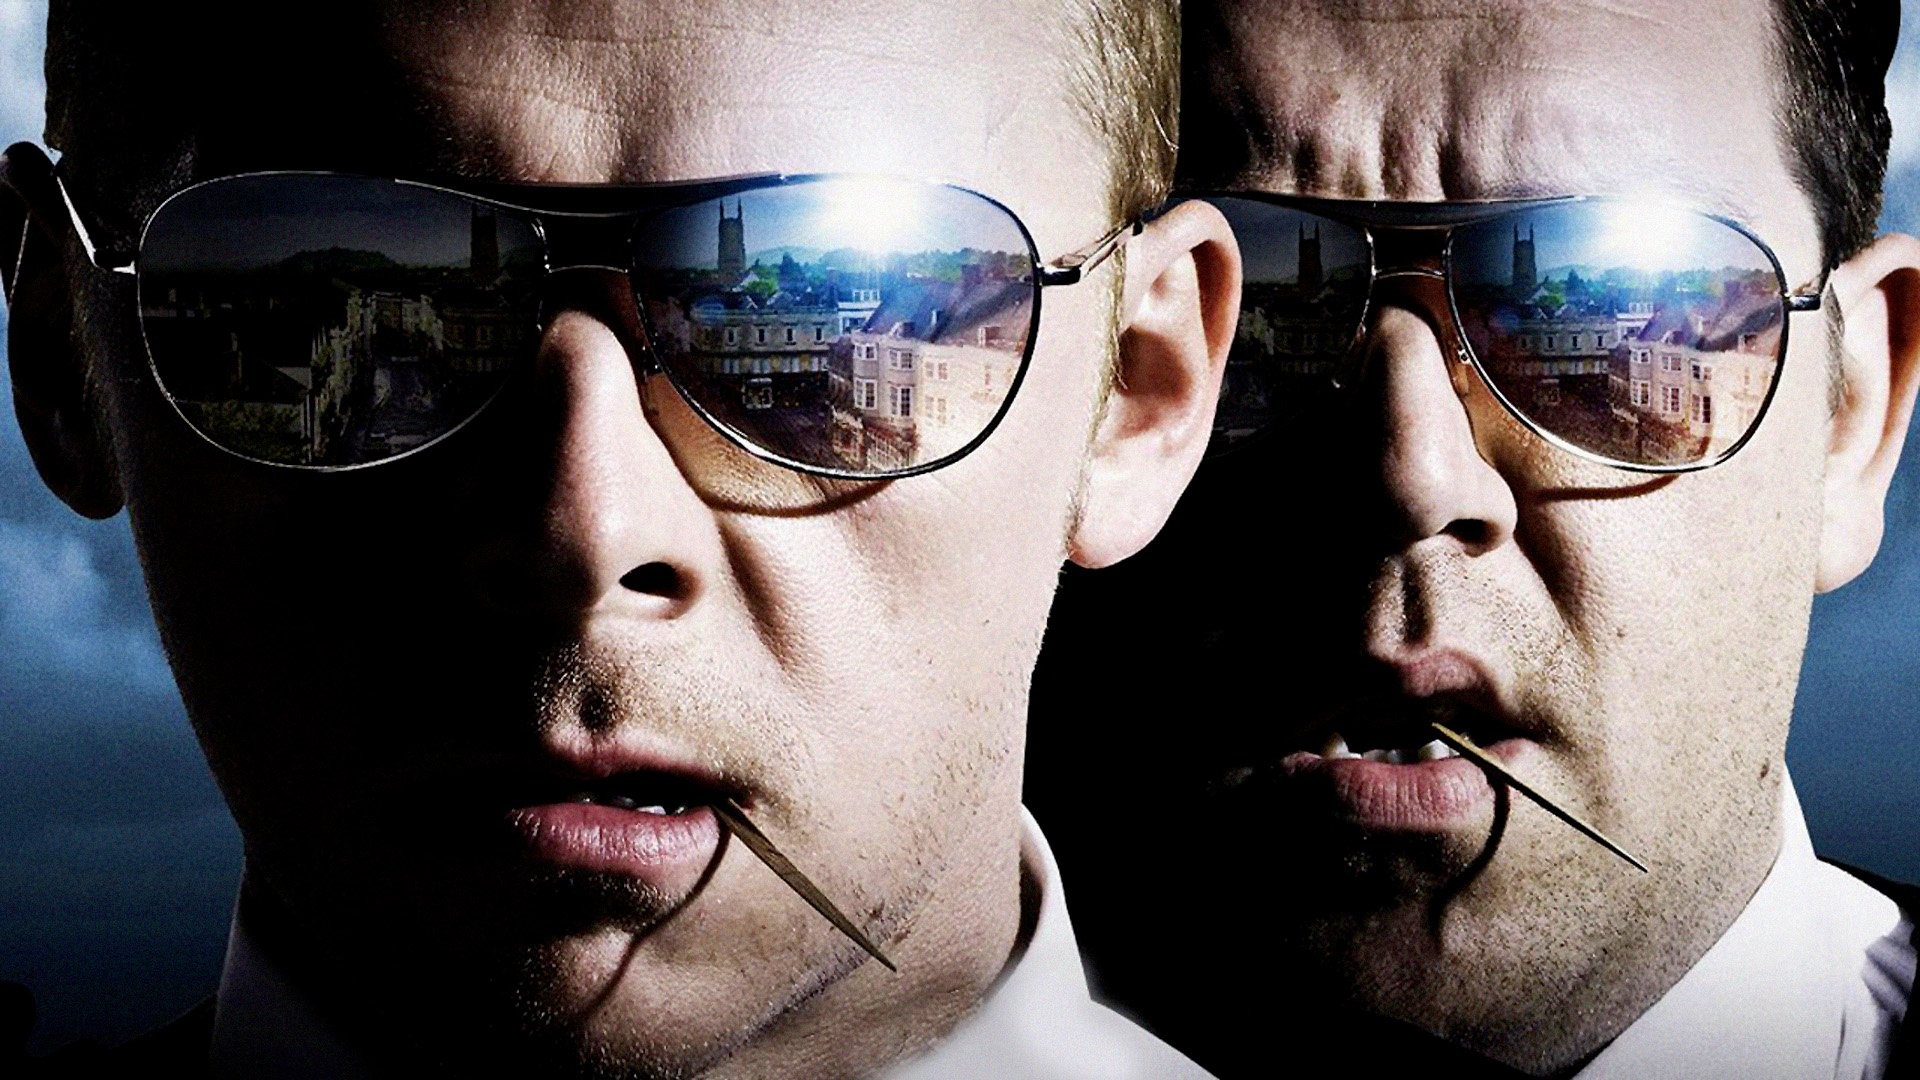 Hot Fuzz, HD background image, Dynamic visual style, Exciting police adventure, 1920x1080 Full HD Desktop